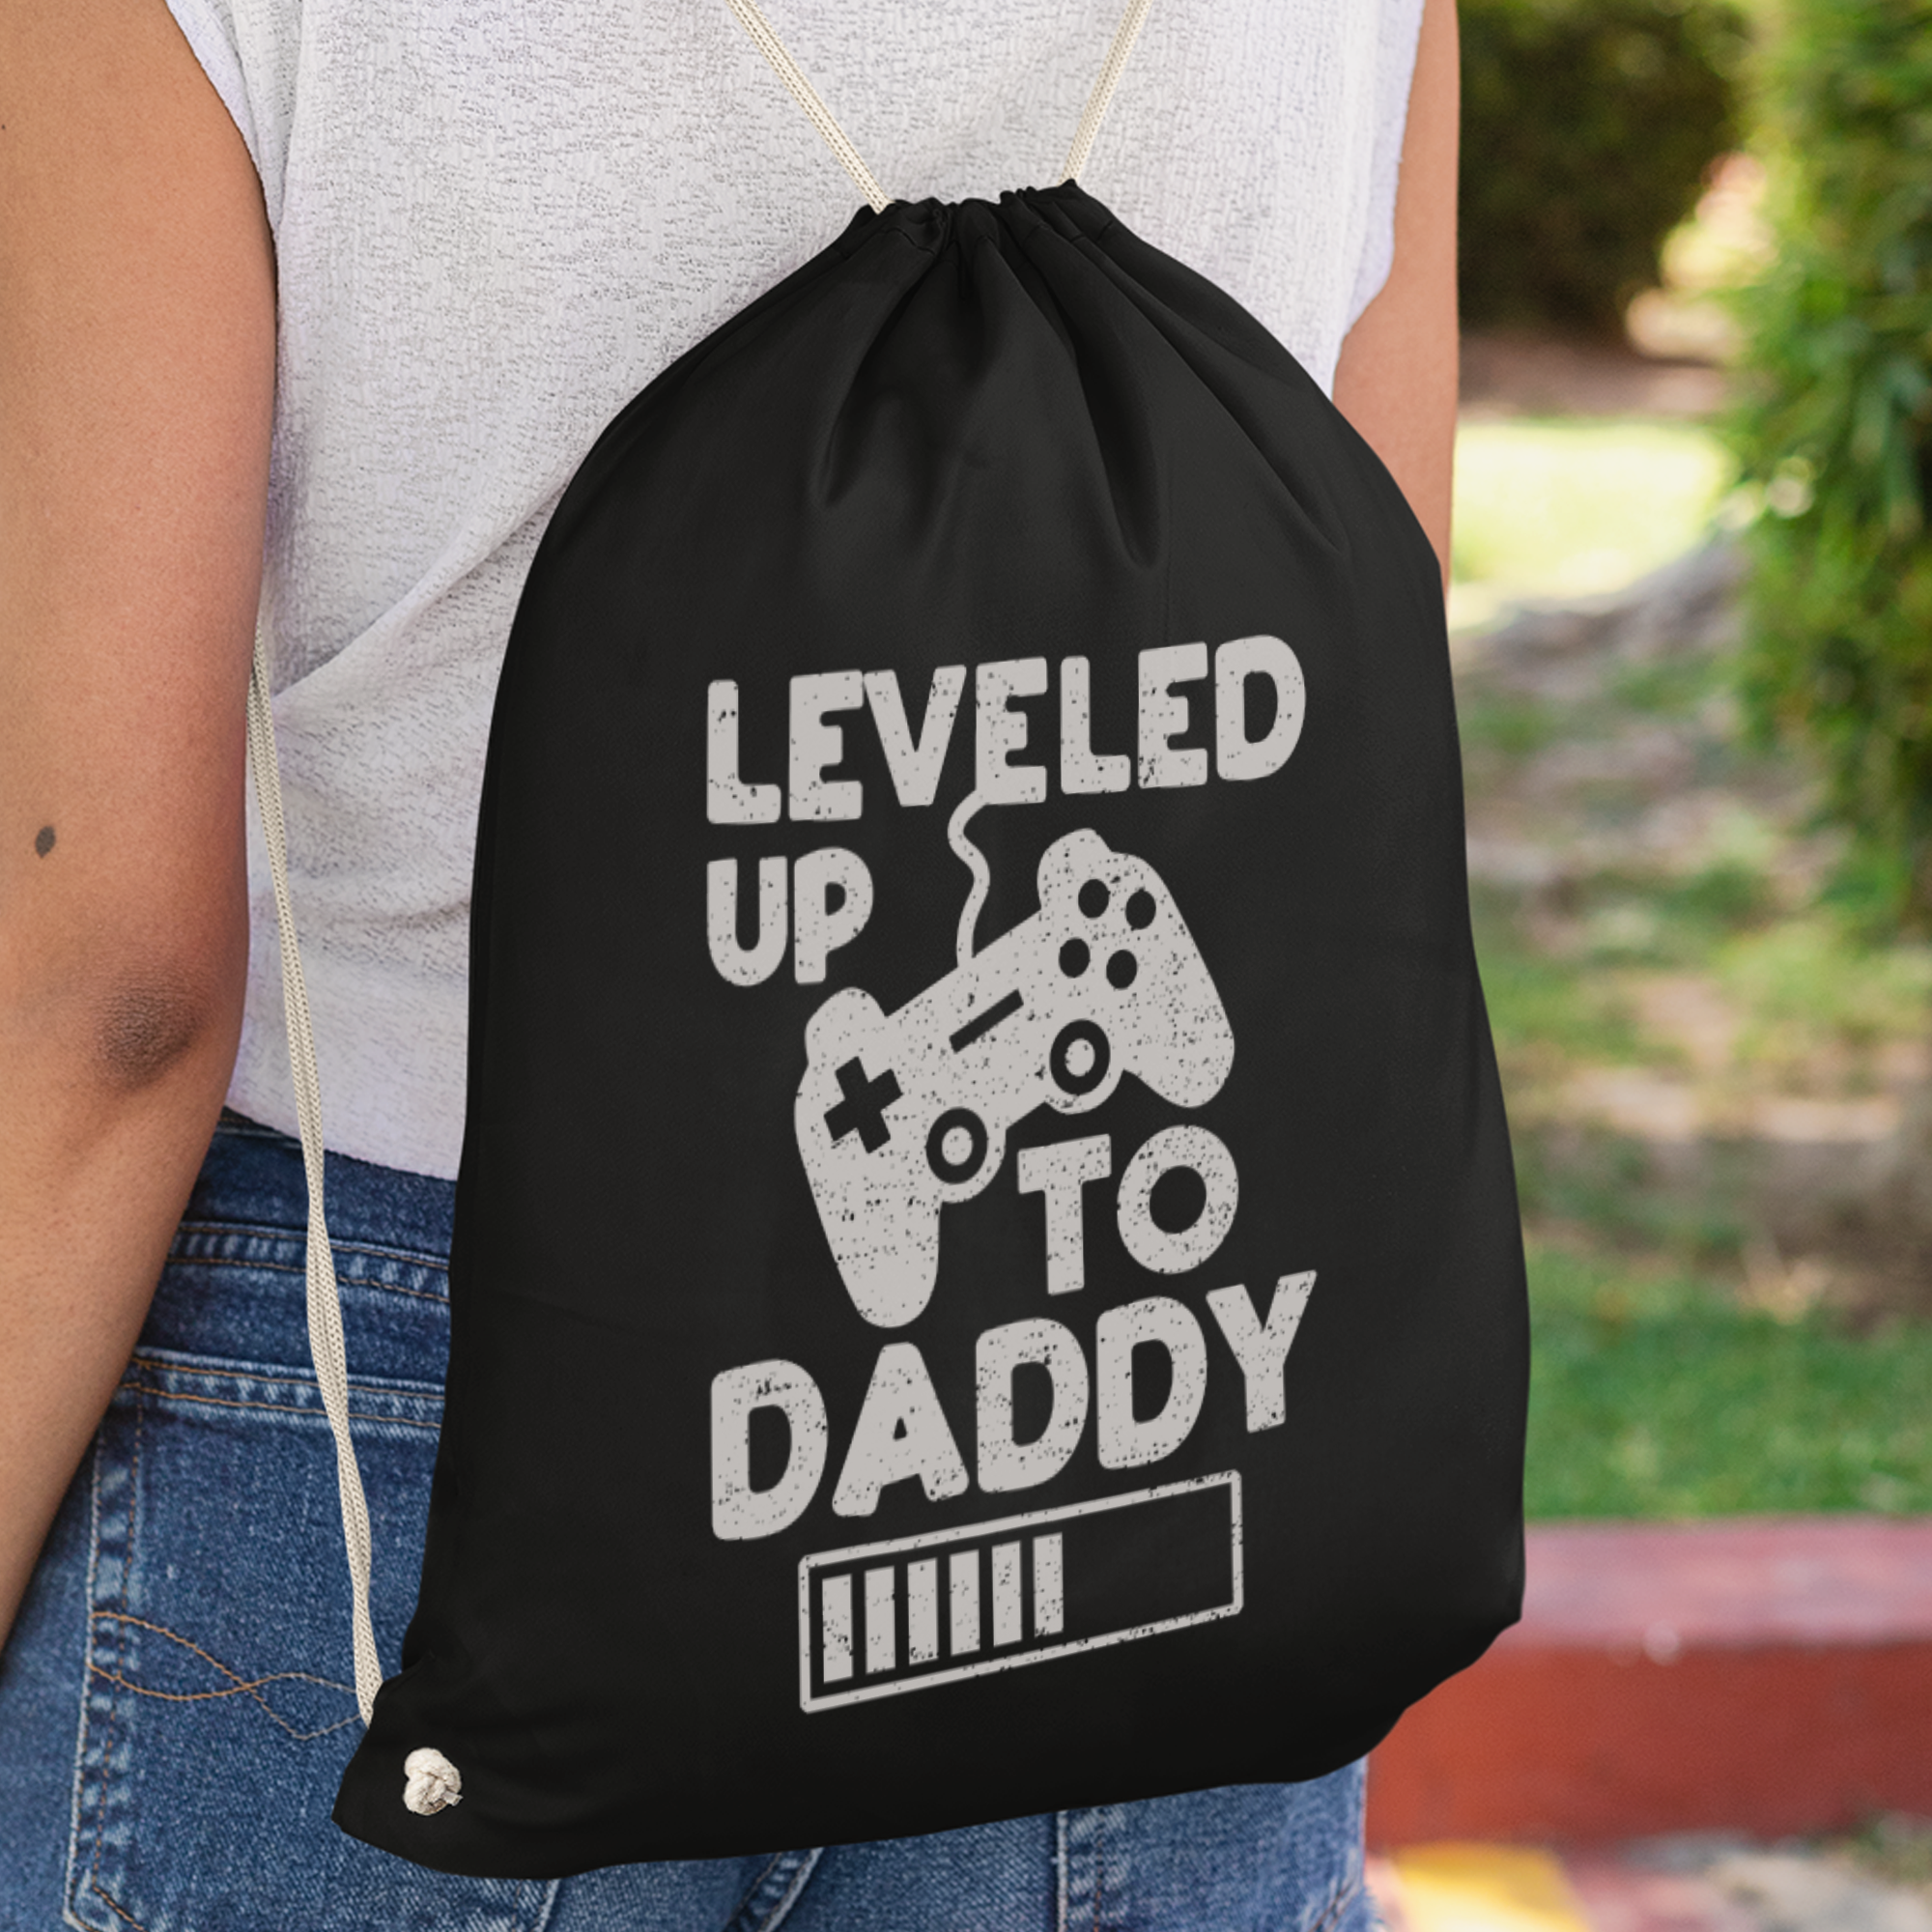 Leveled Up To Daddy Turnbeutel - DESIGNSBYJNK5.COM